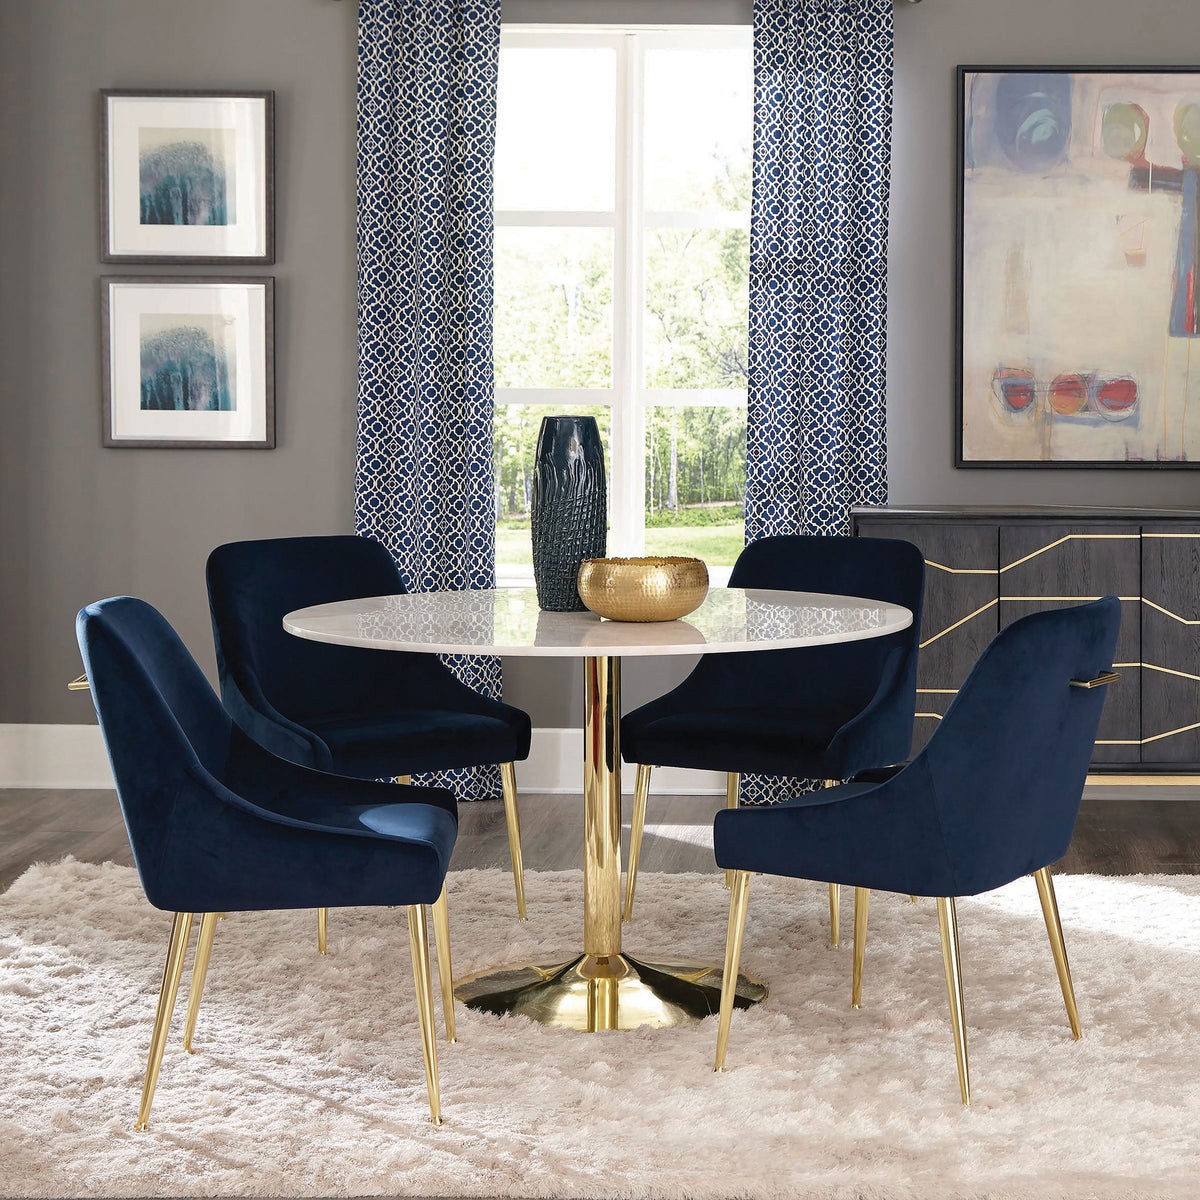 Kella 5-piece Round Marble Top Dining Set Blue and Gold Kella 5-piece Round Marble Top Dining Set Blue and Gold Half Price Furniture